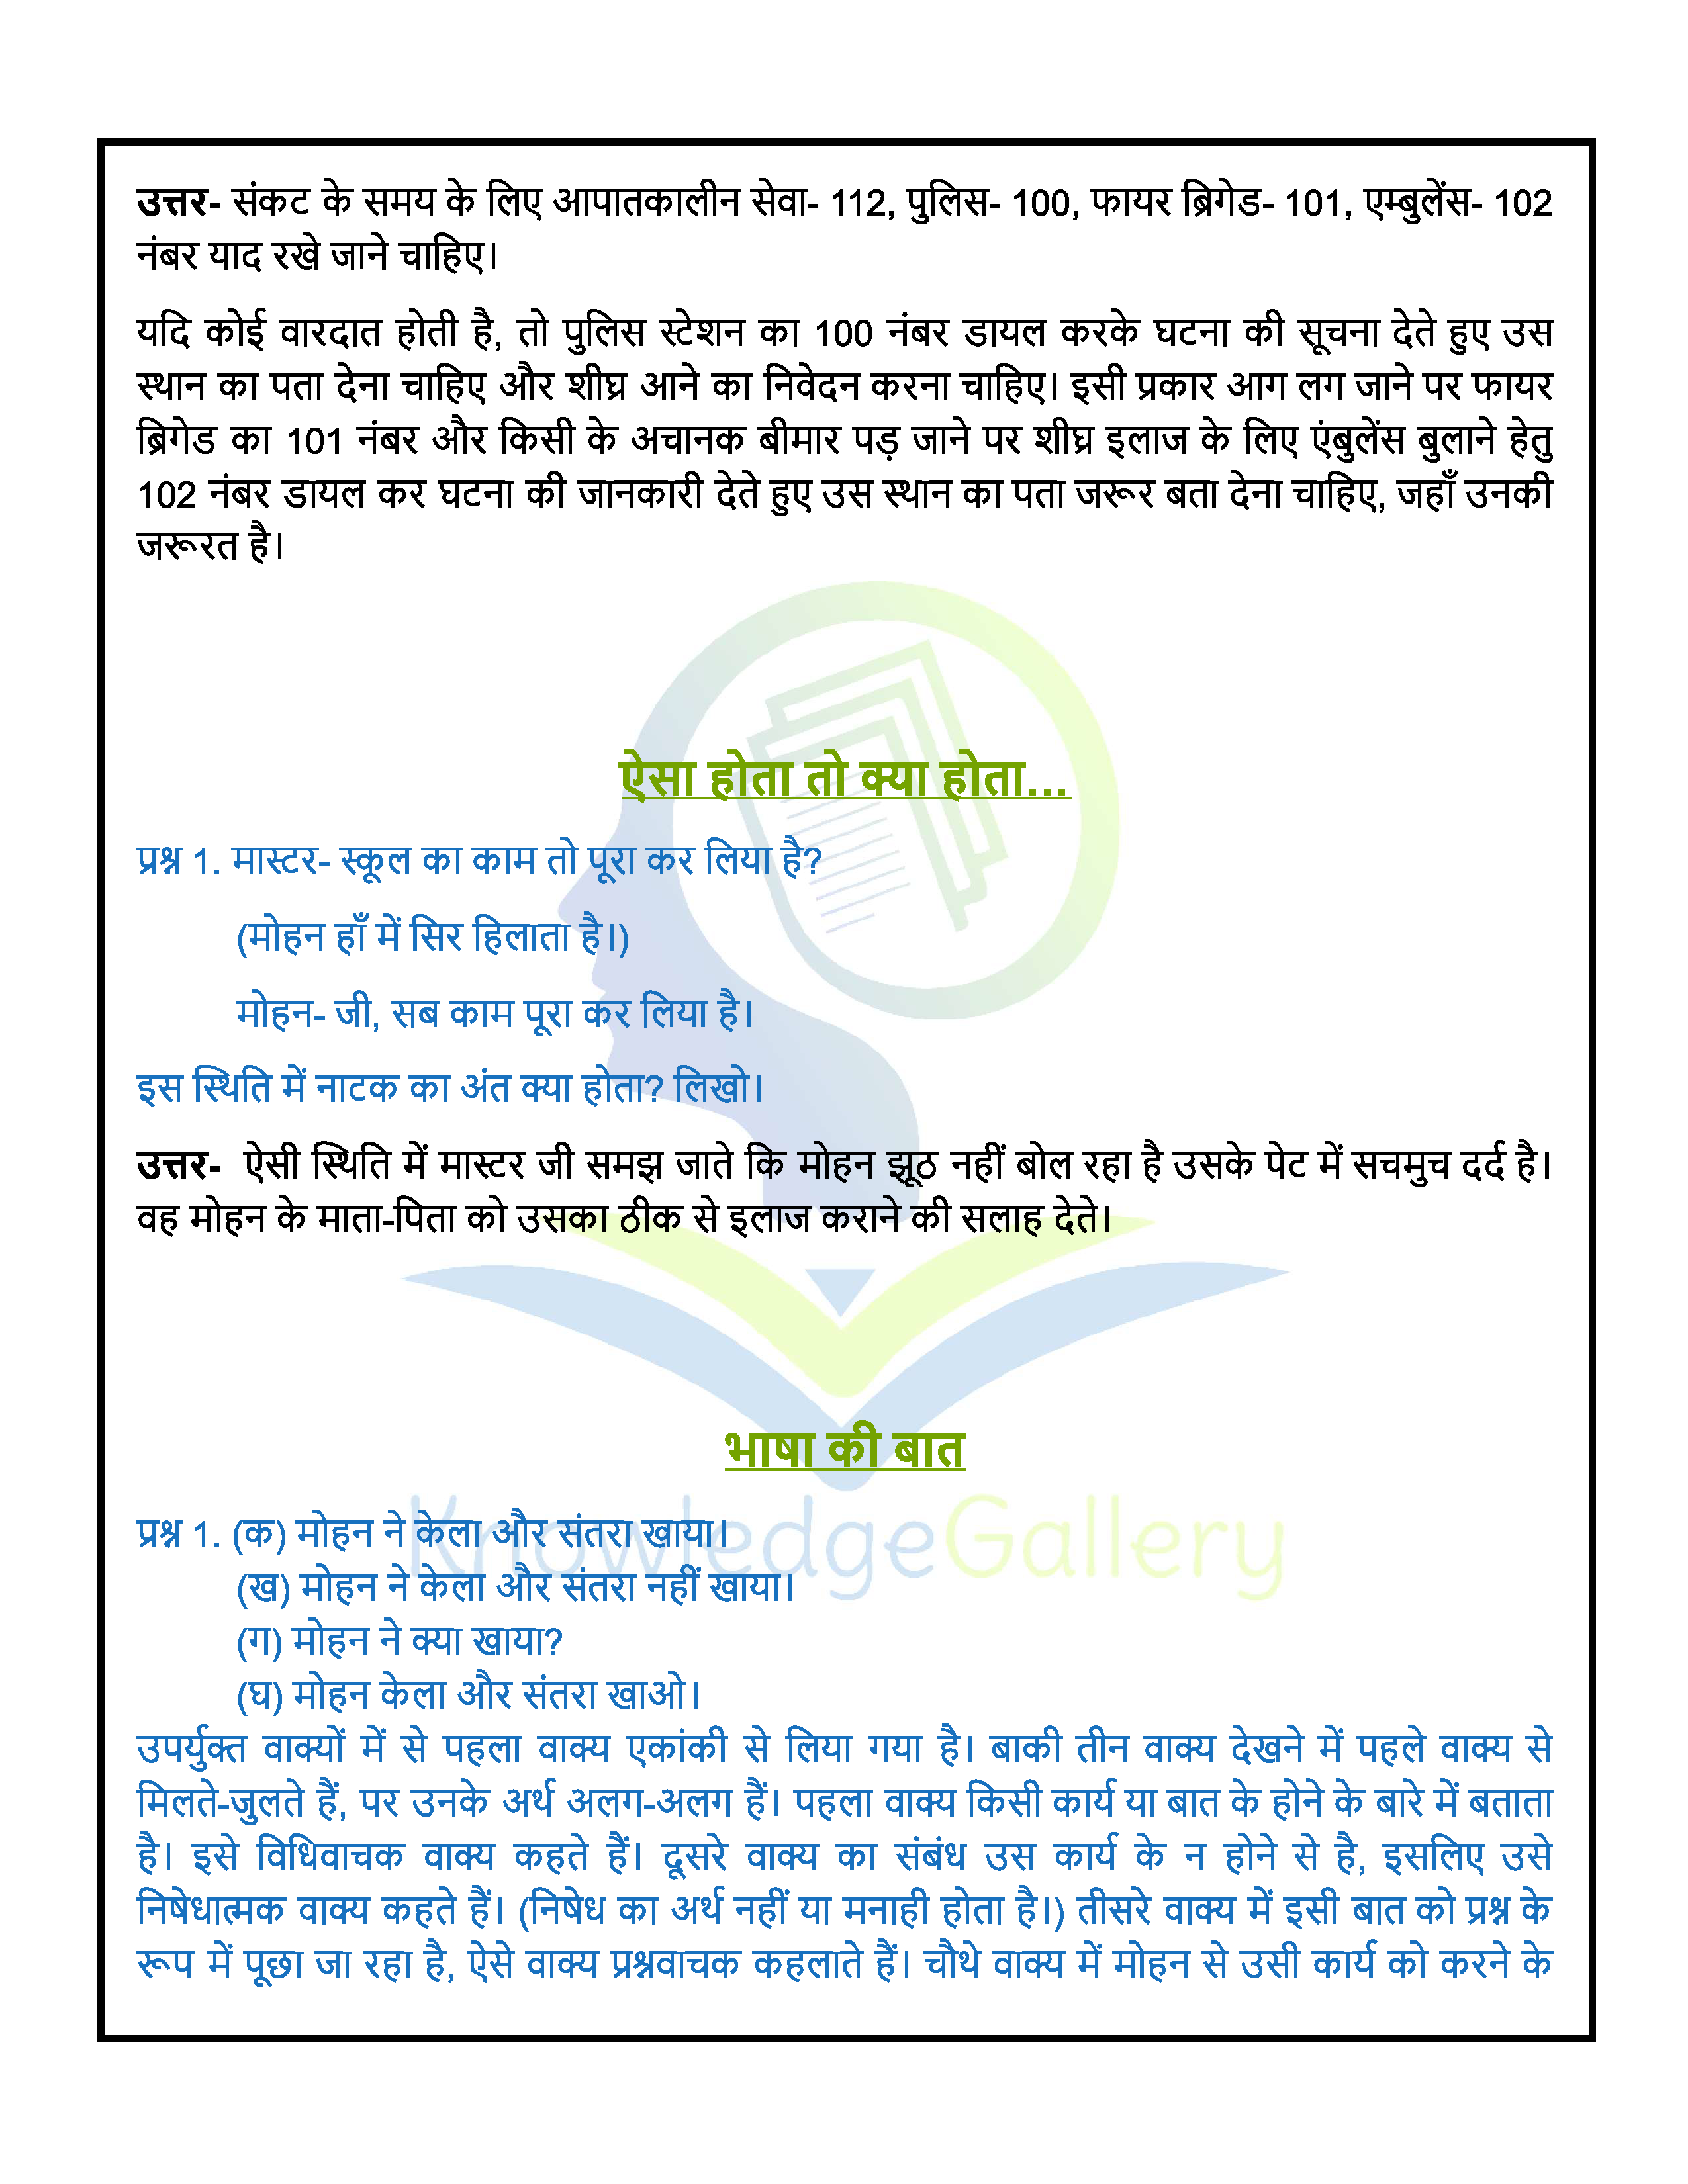 NCERT Solution For Class 6 Hindi Chapter 8 part 3